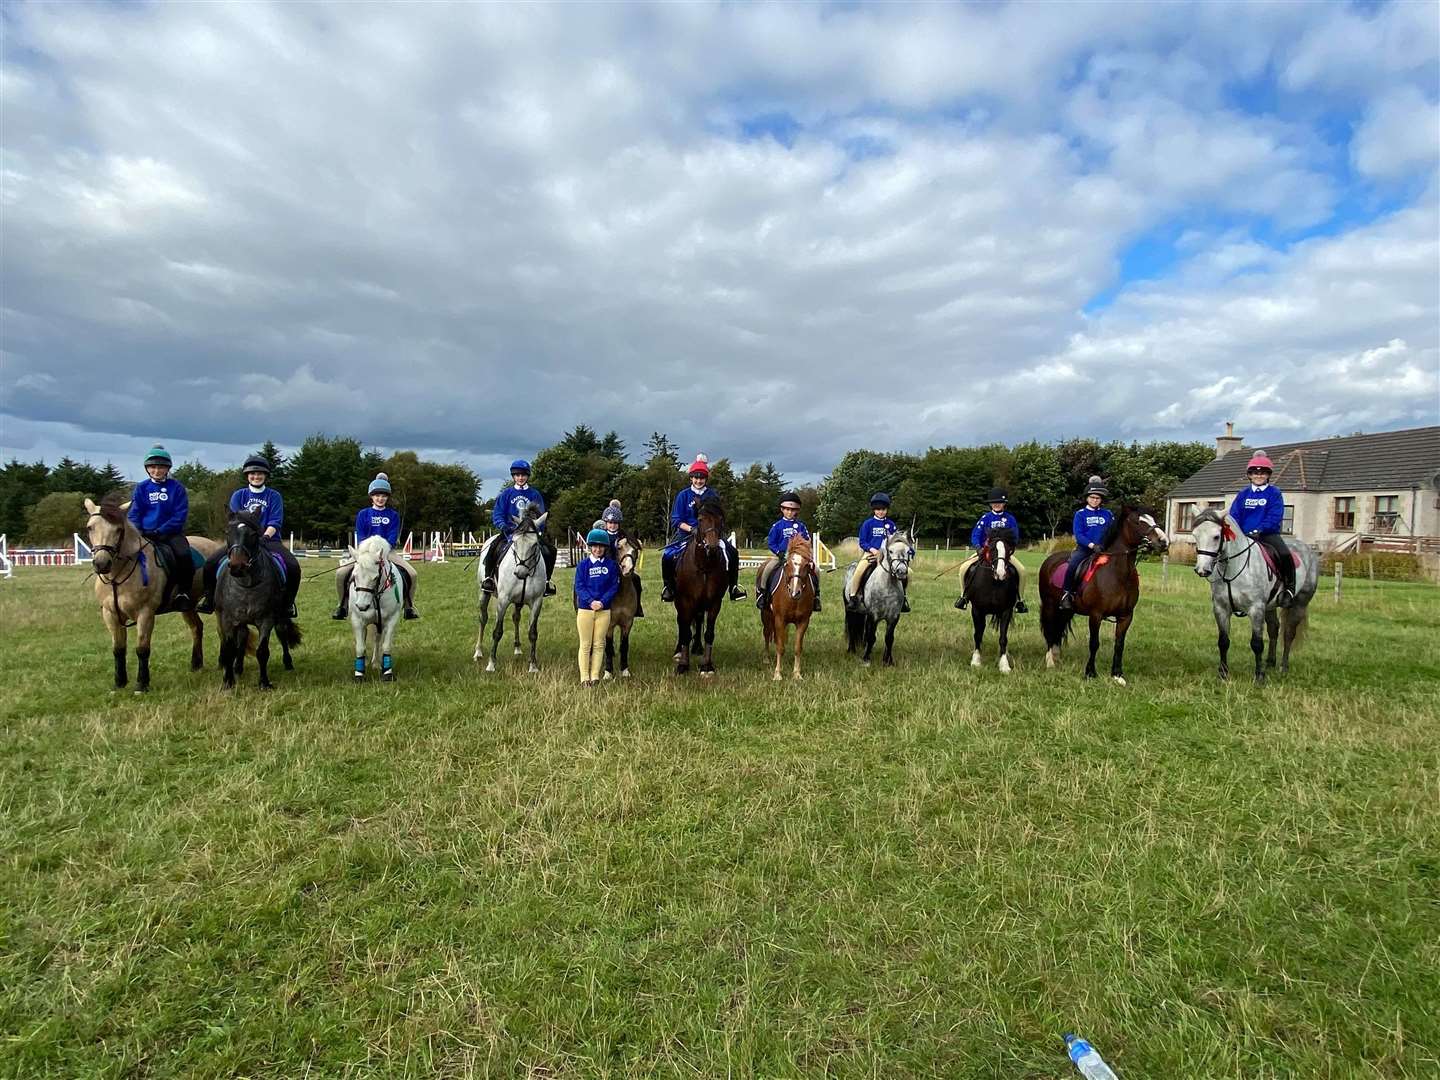 Members of the Caithness Branch of the Pony Club smartly turned out for the gymkhana.